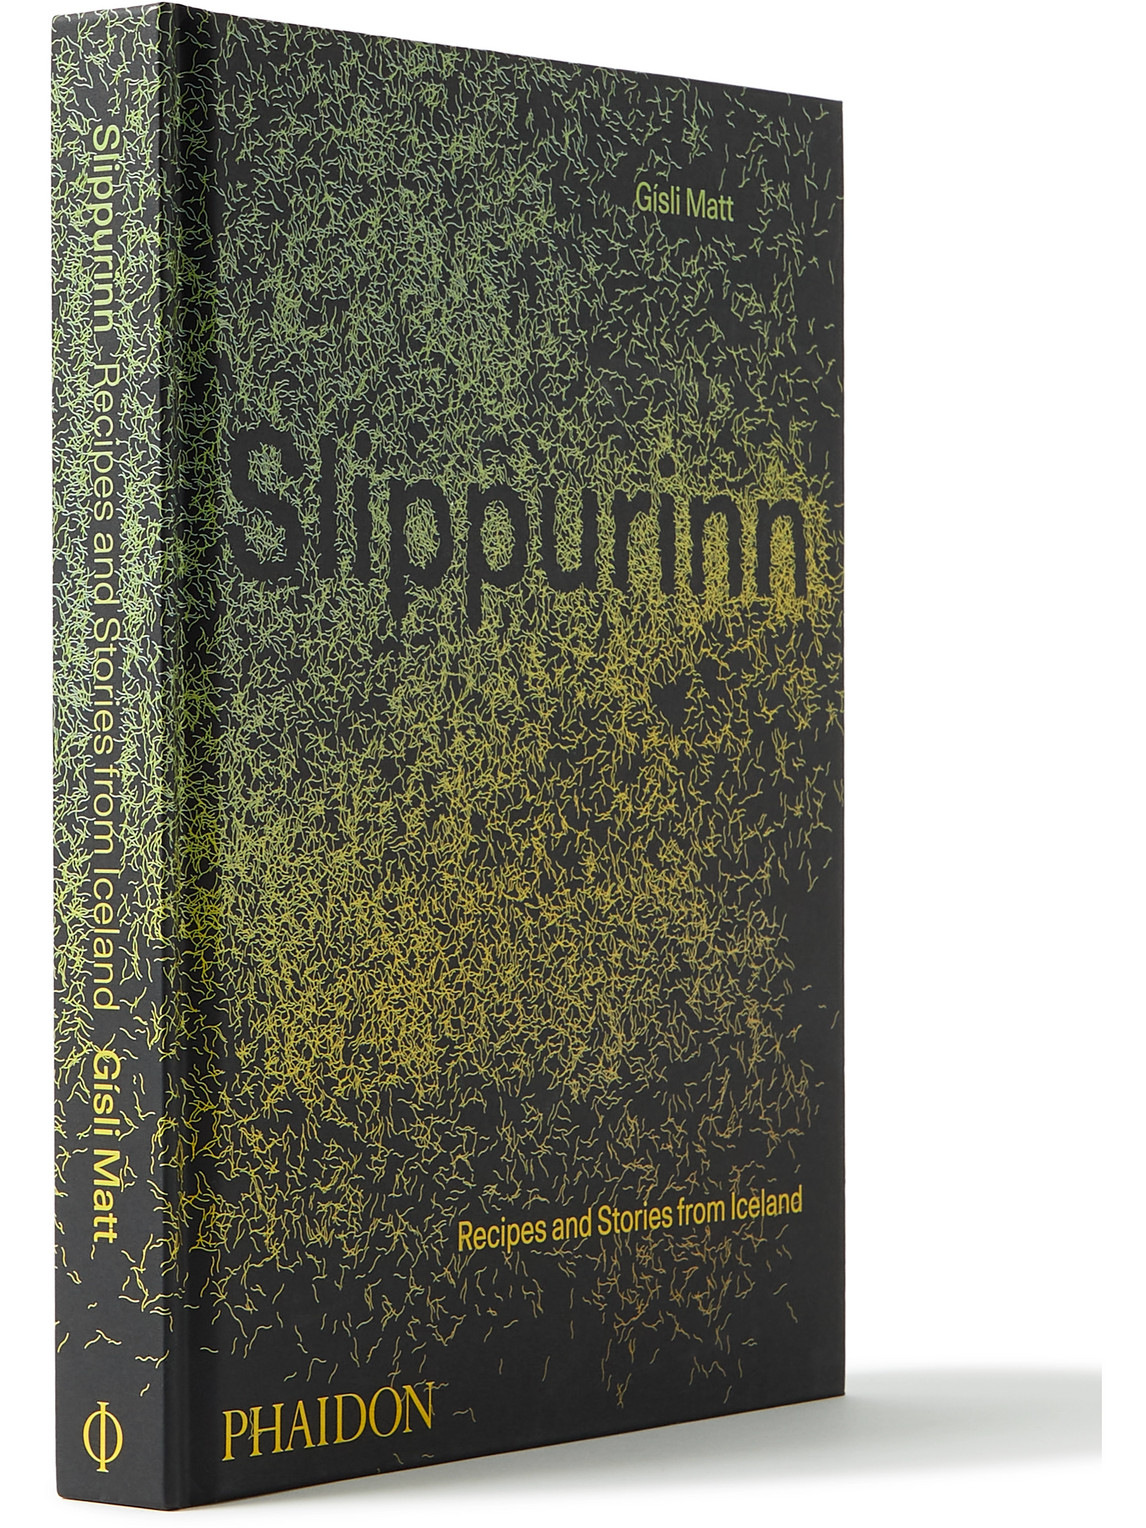 Phaidon Slippurinn: Recipes And Stories From Iceland Hardcover Book In Green